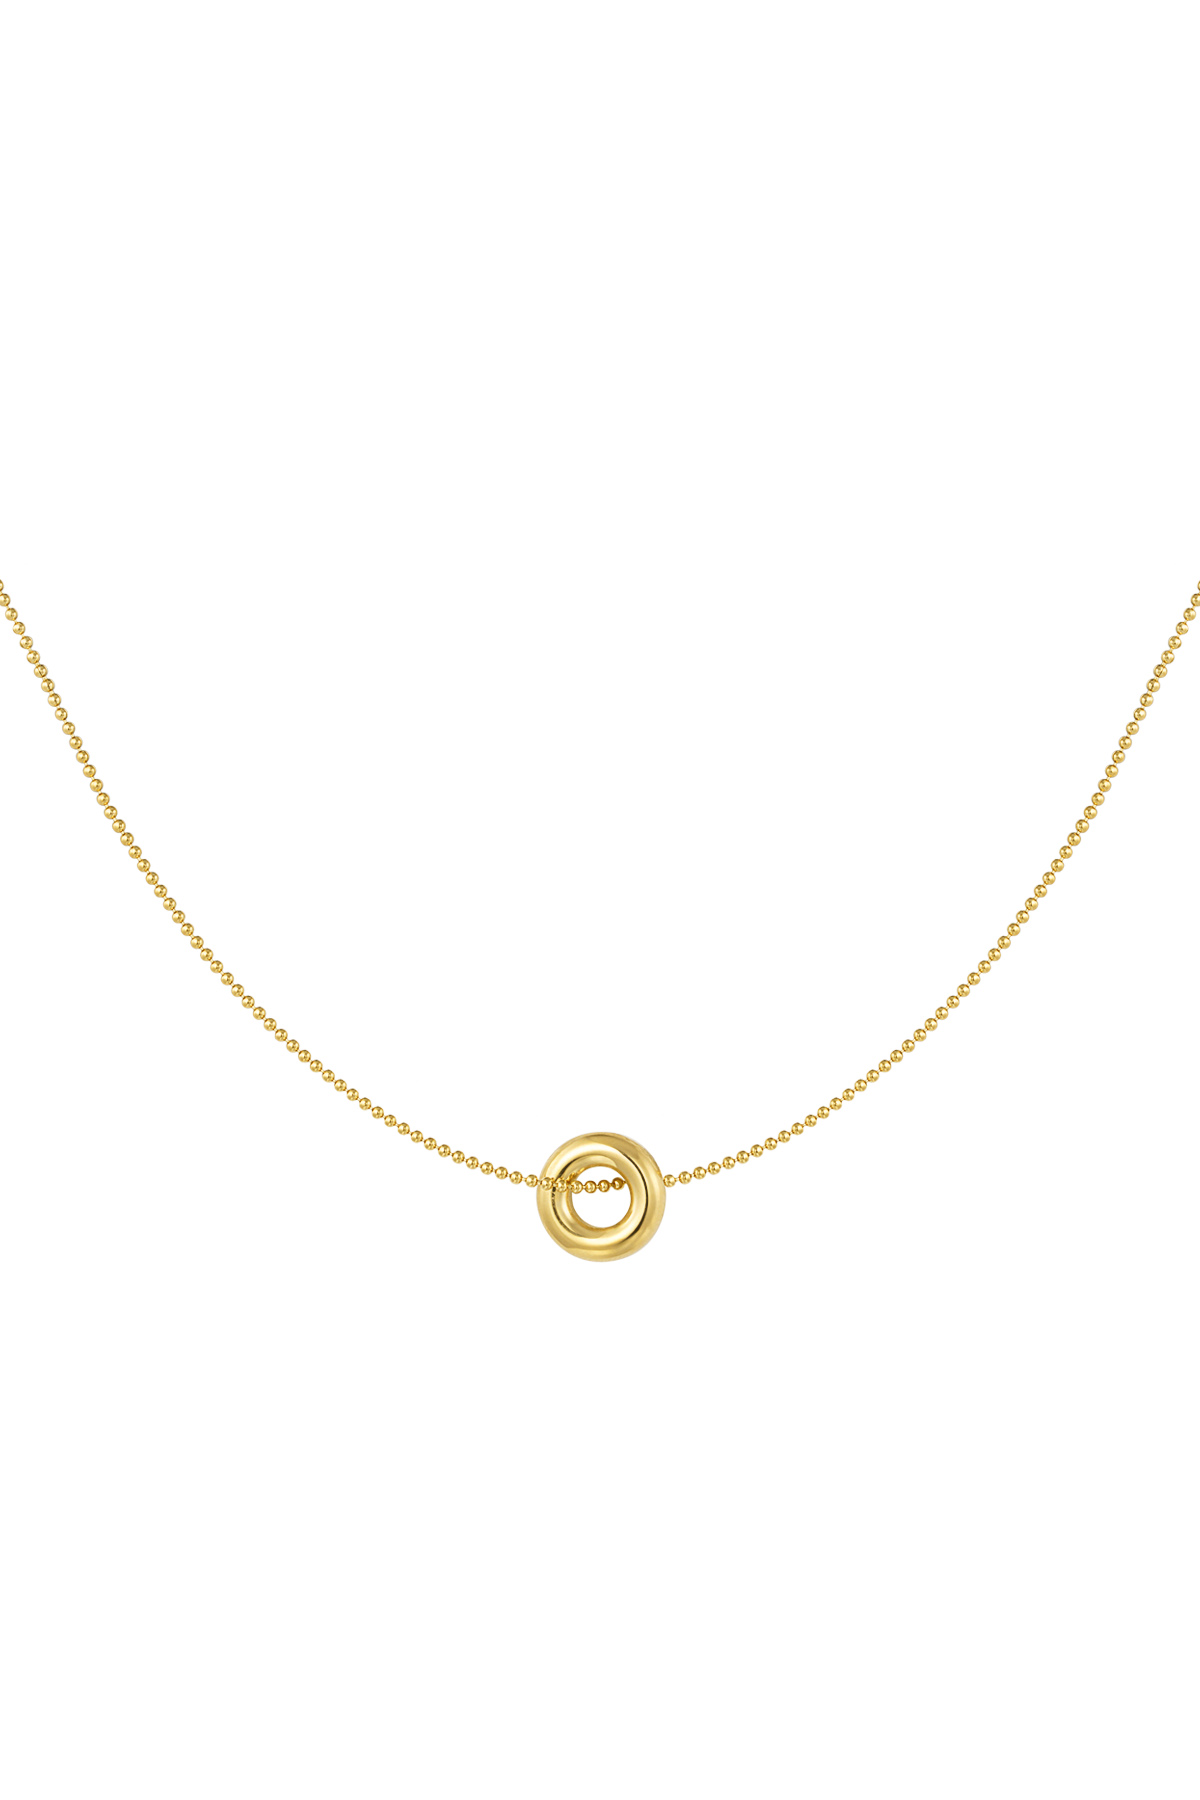 Necklace donut charm - gold h5 